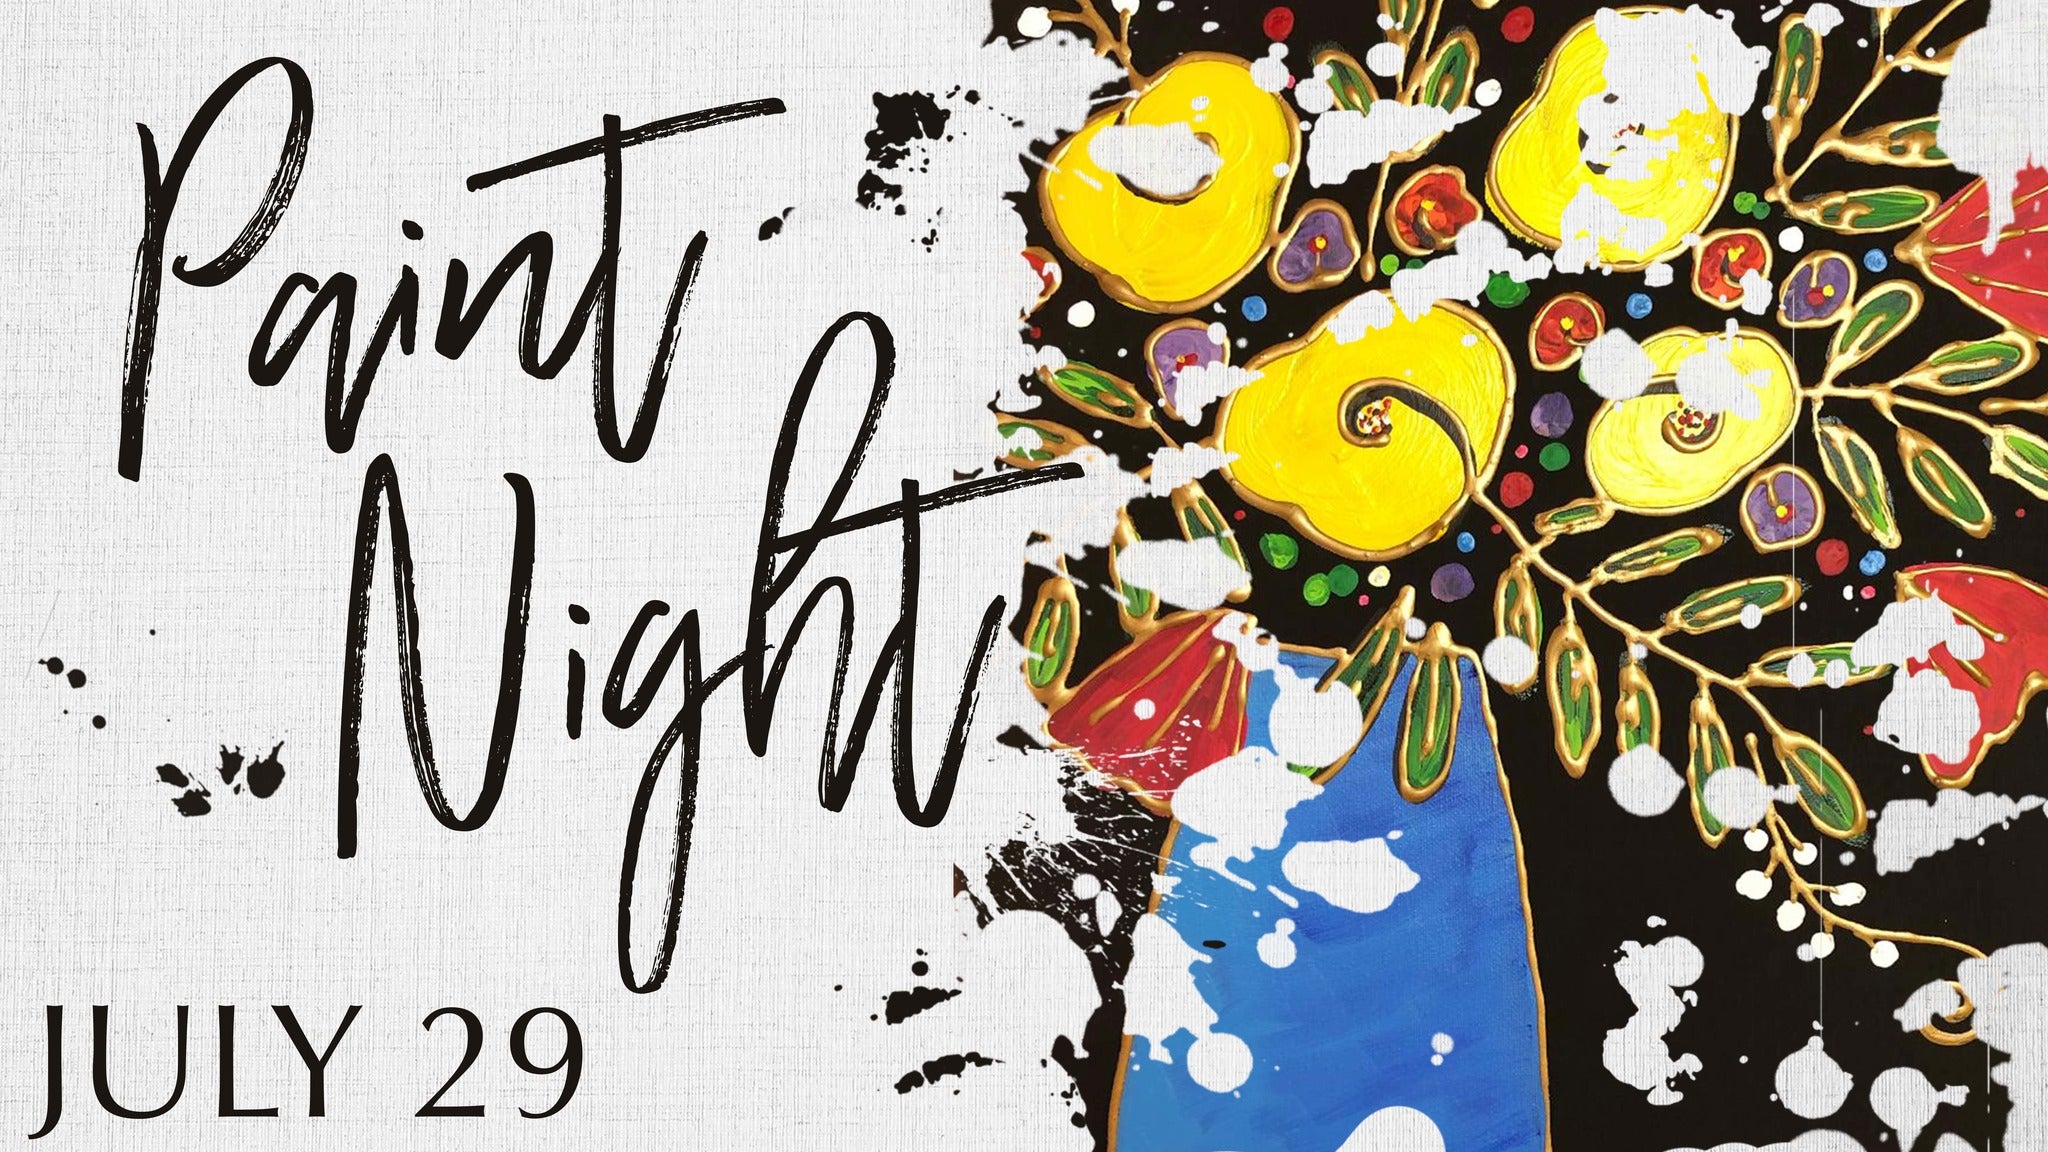 Paint Night at Yucaipa Performing Arts Center Indoor Theatre